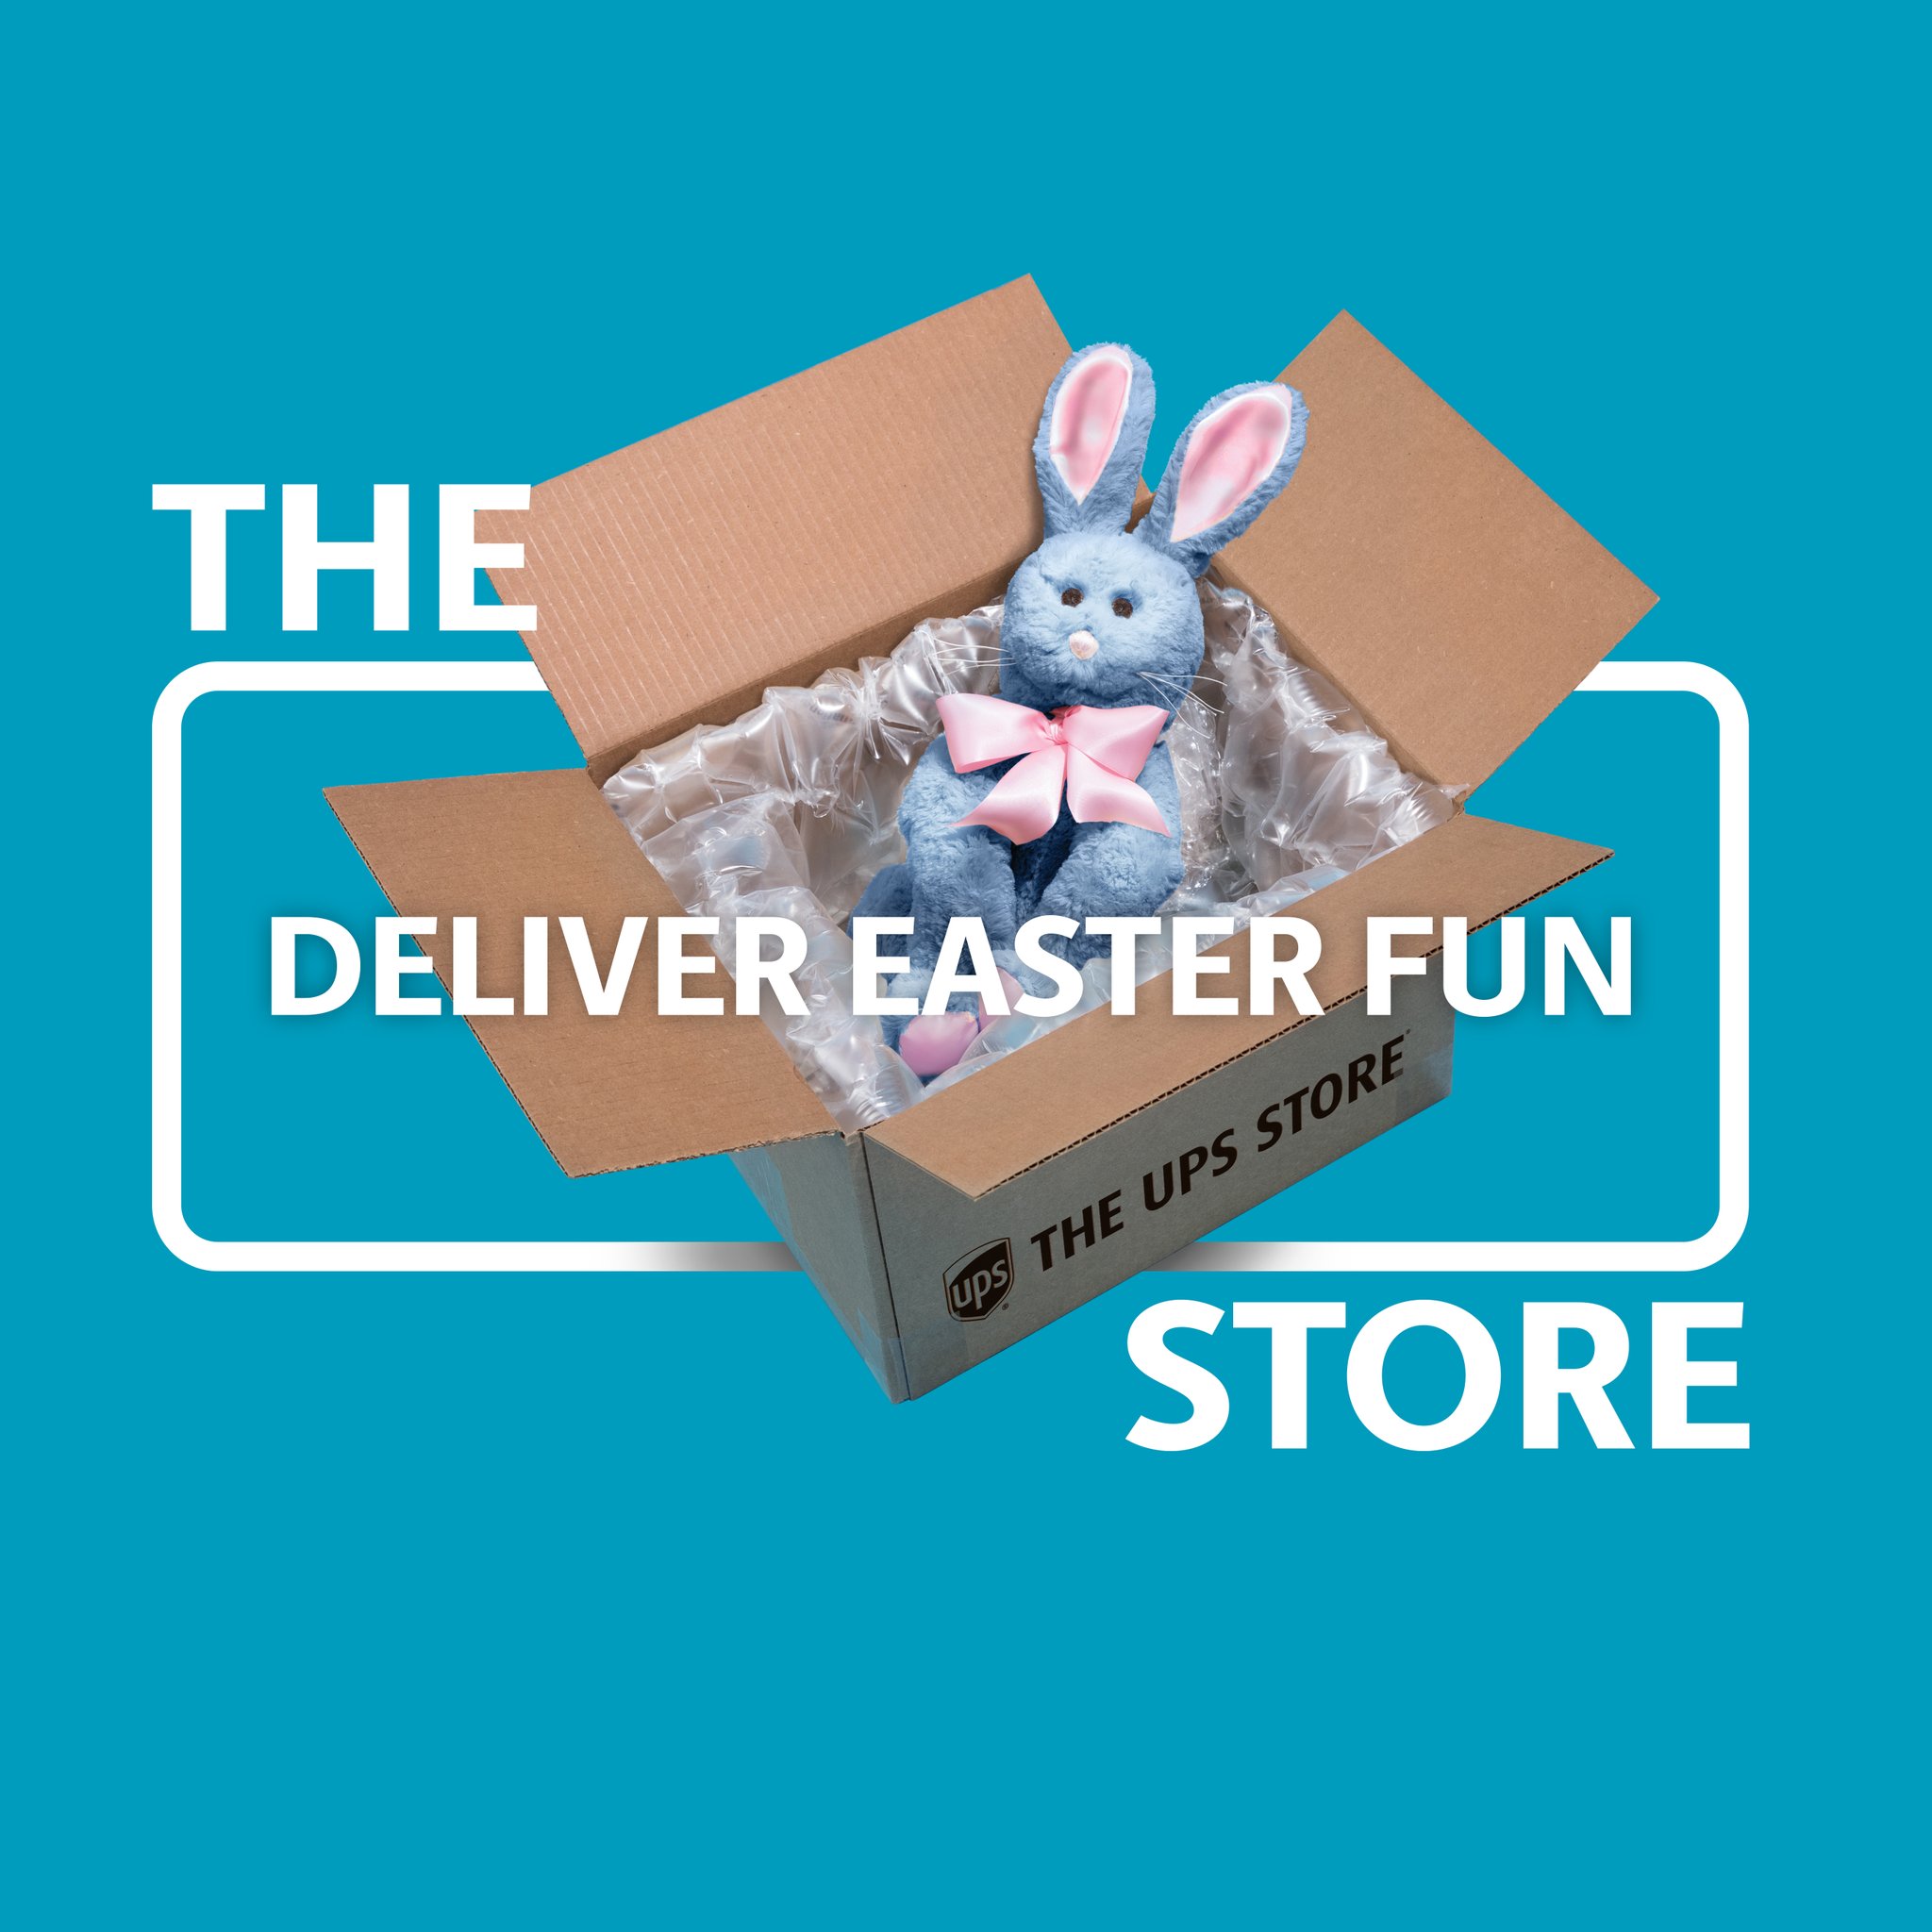 The UPS Store on X: 🐰 Hop into #Easter fun! Find a store near you for egg- citing surprises shipped with bunny-speed:    / X